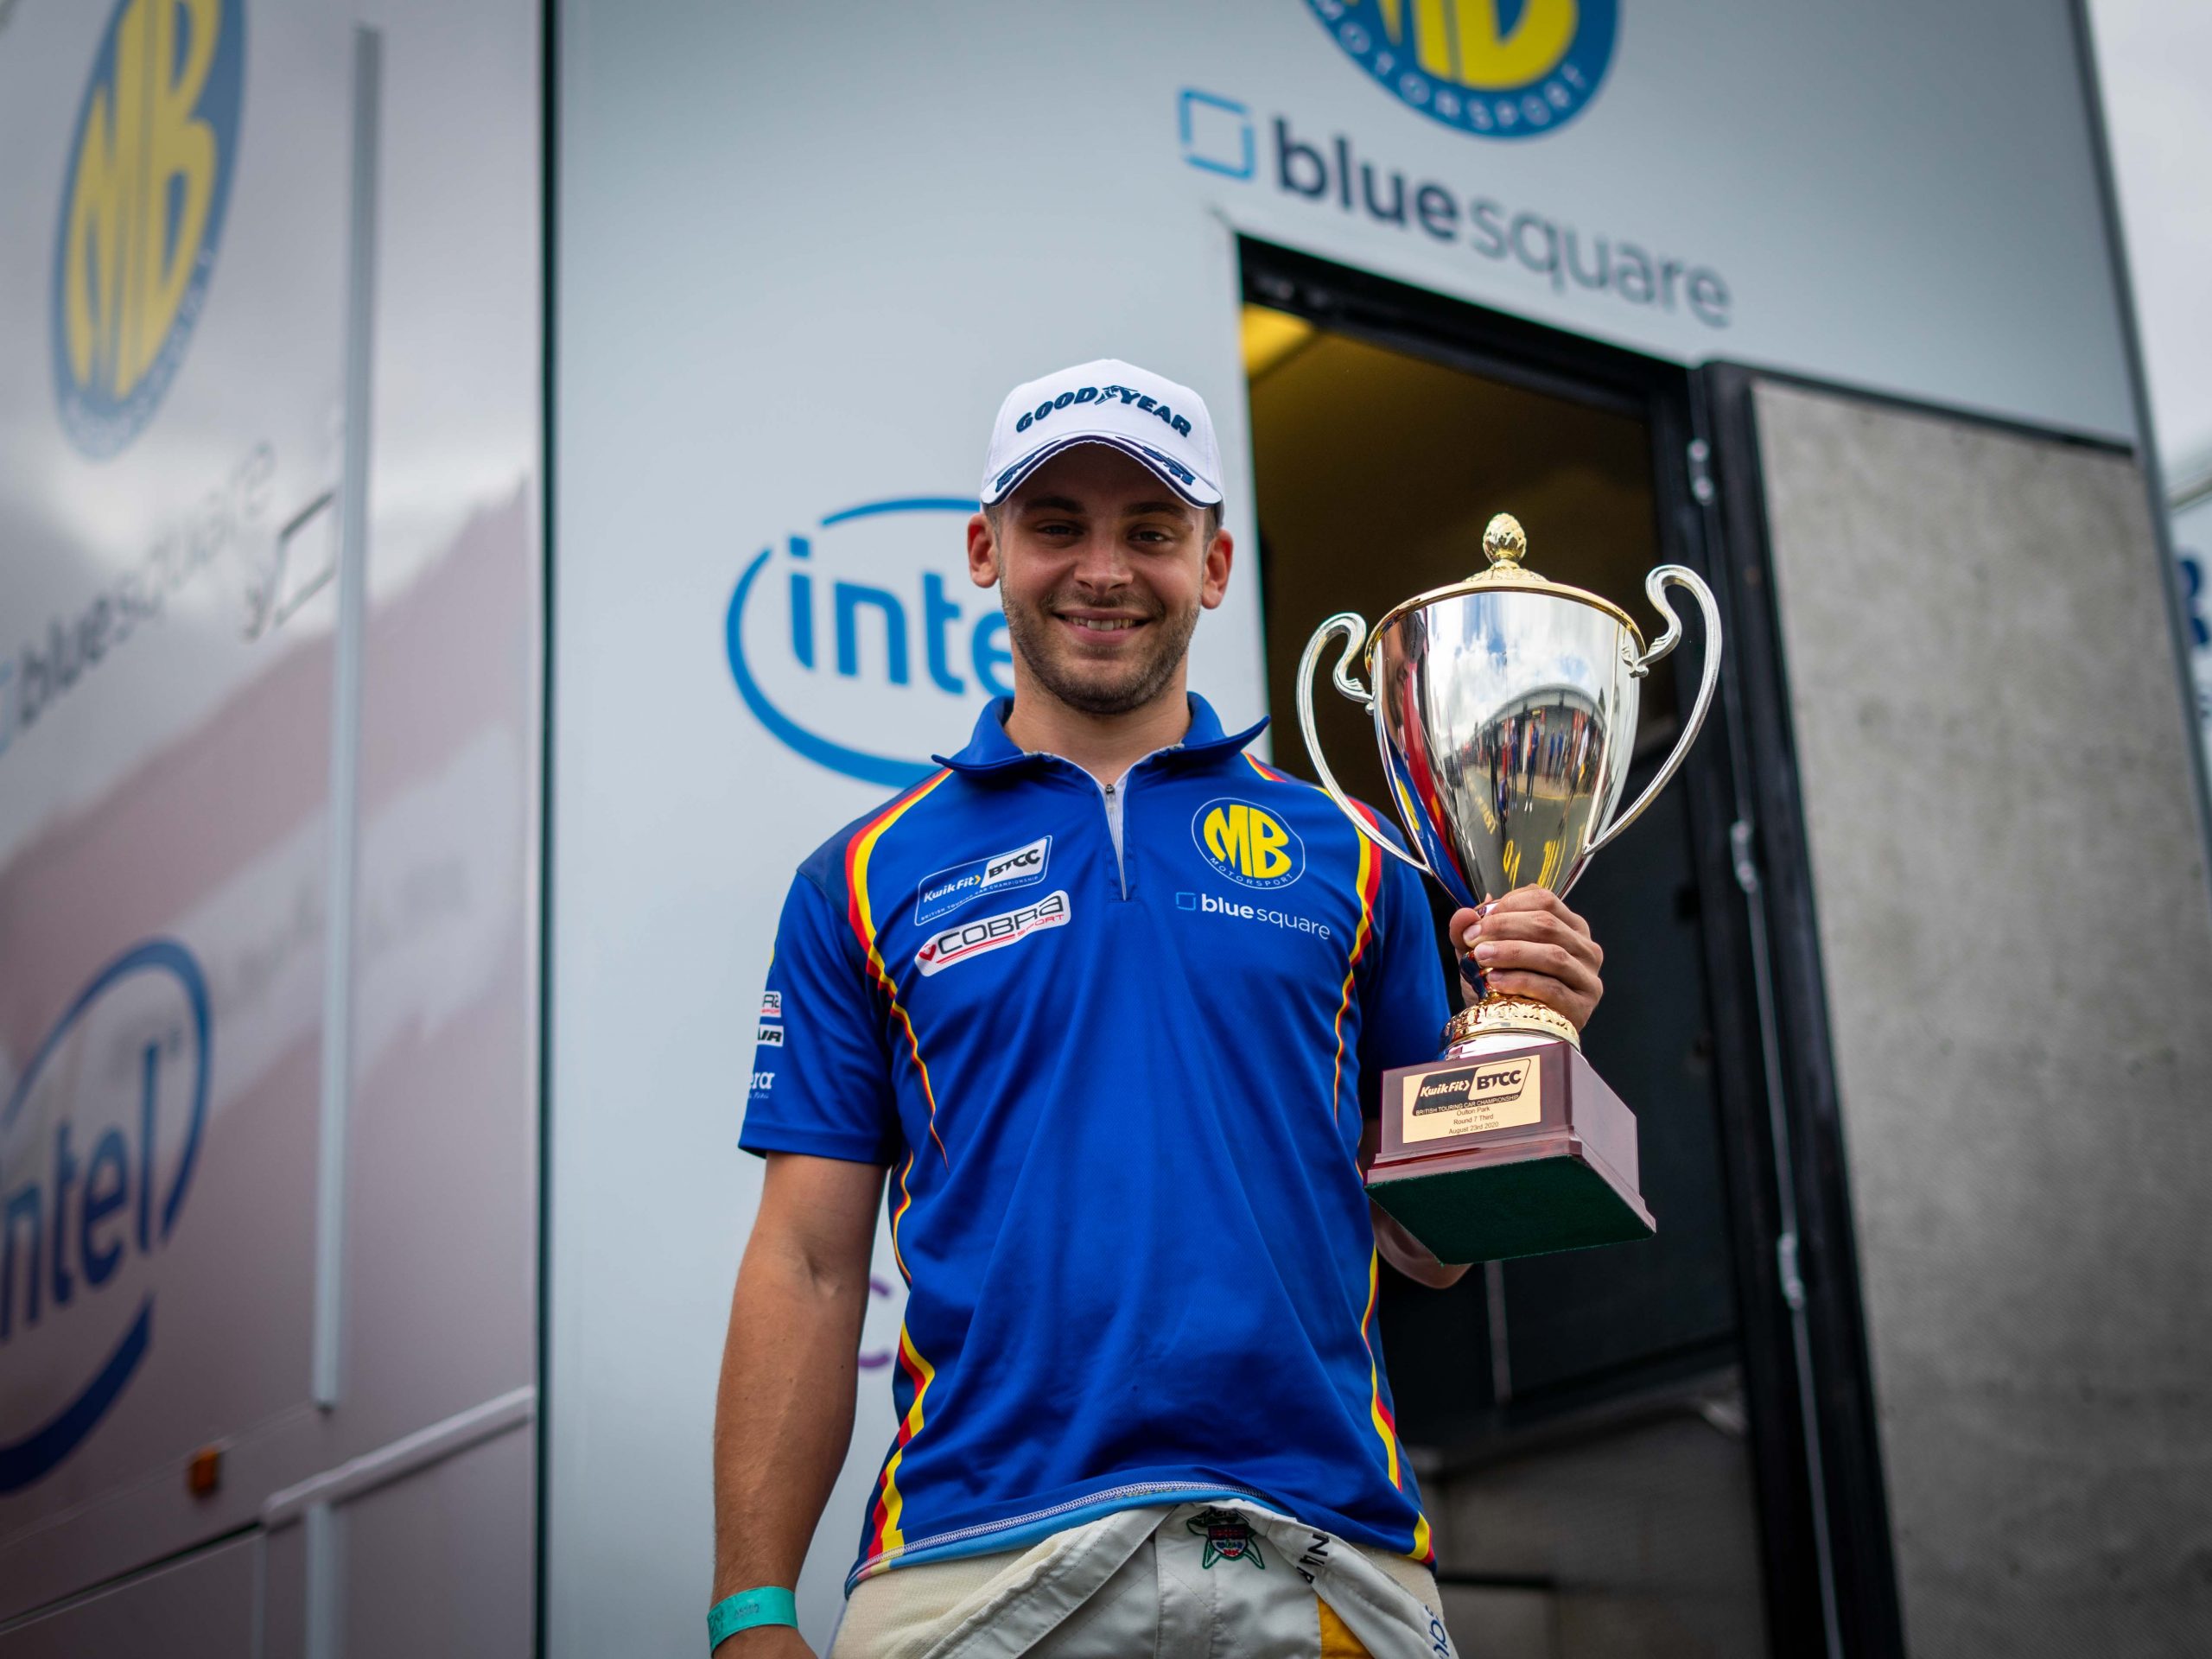 MB Motorsport accelerated by Blue Square secure silverware at Oulton Park